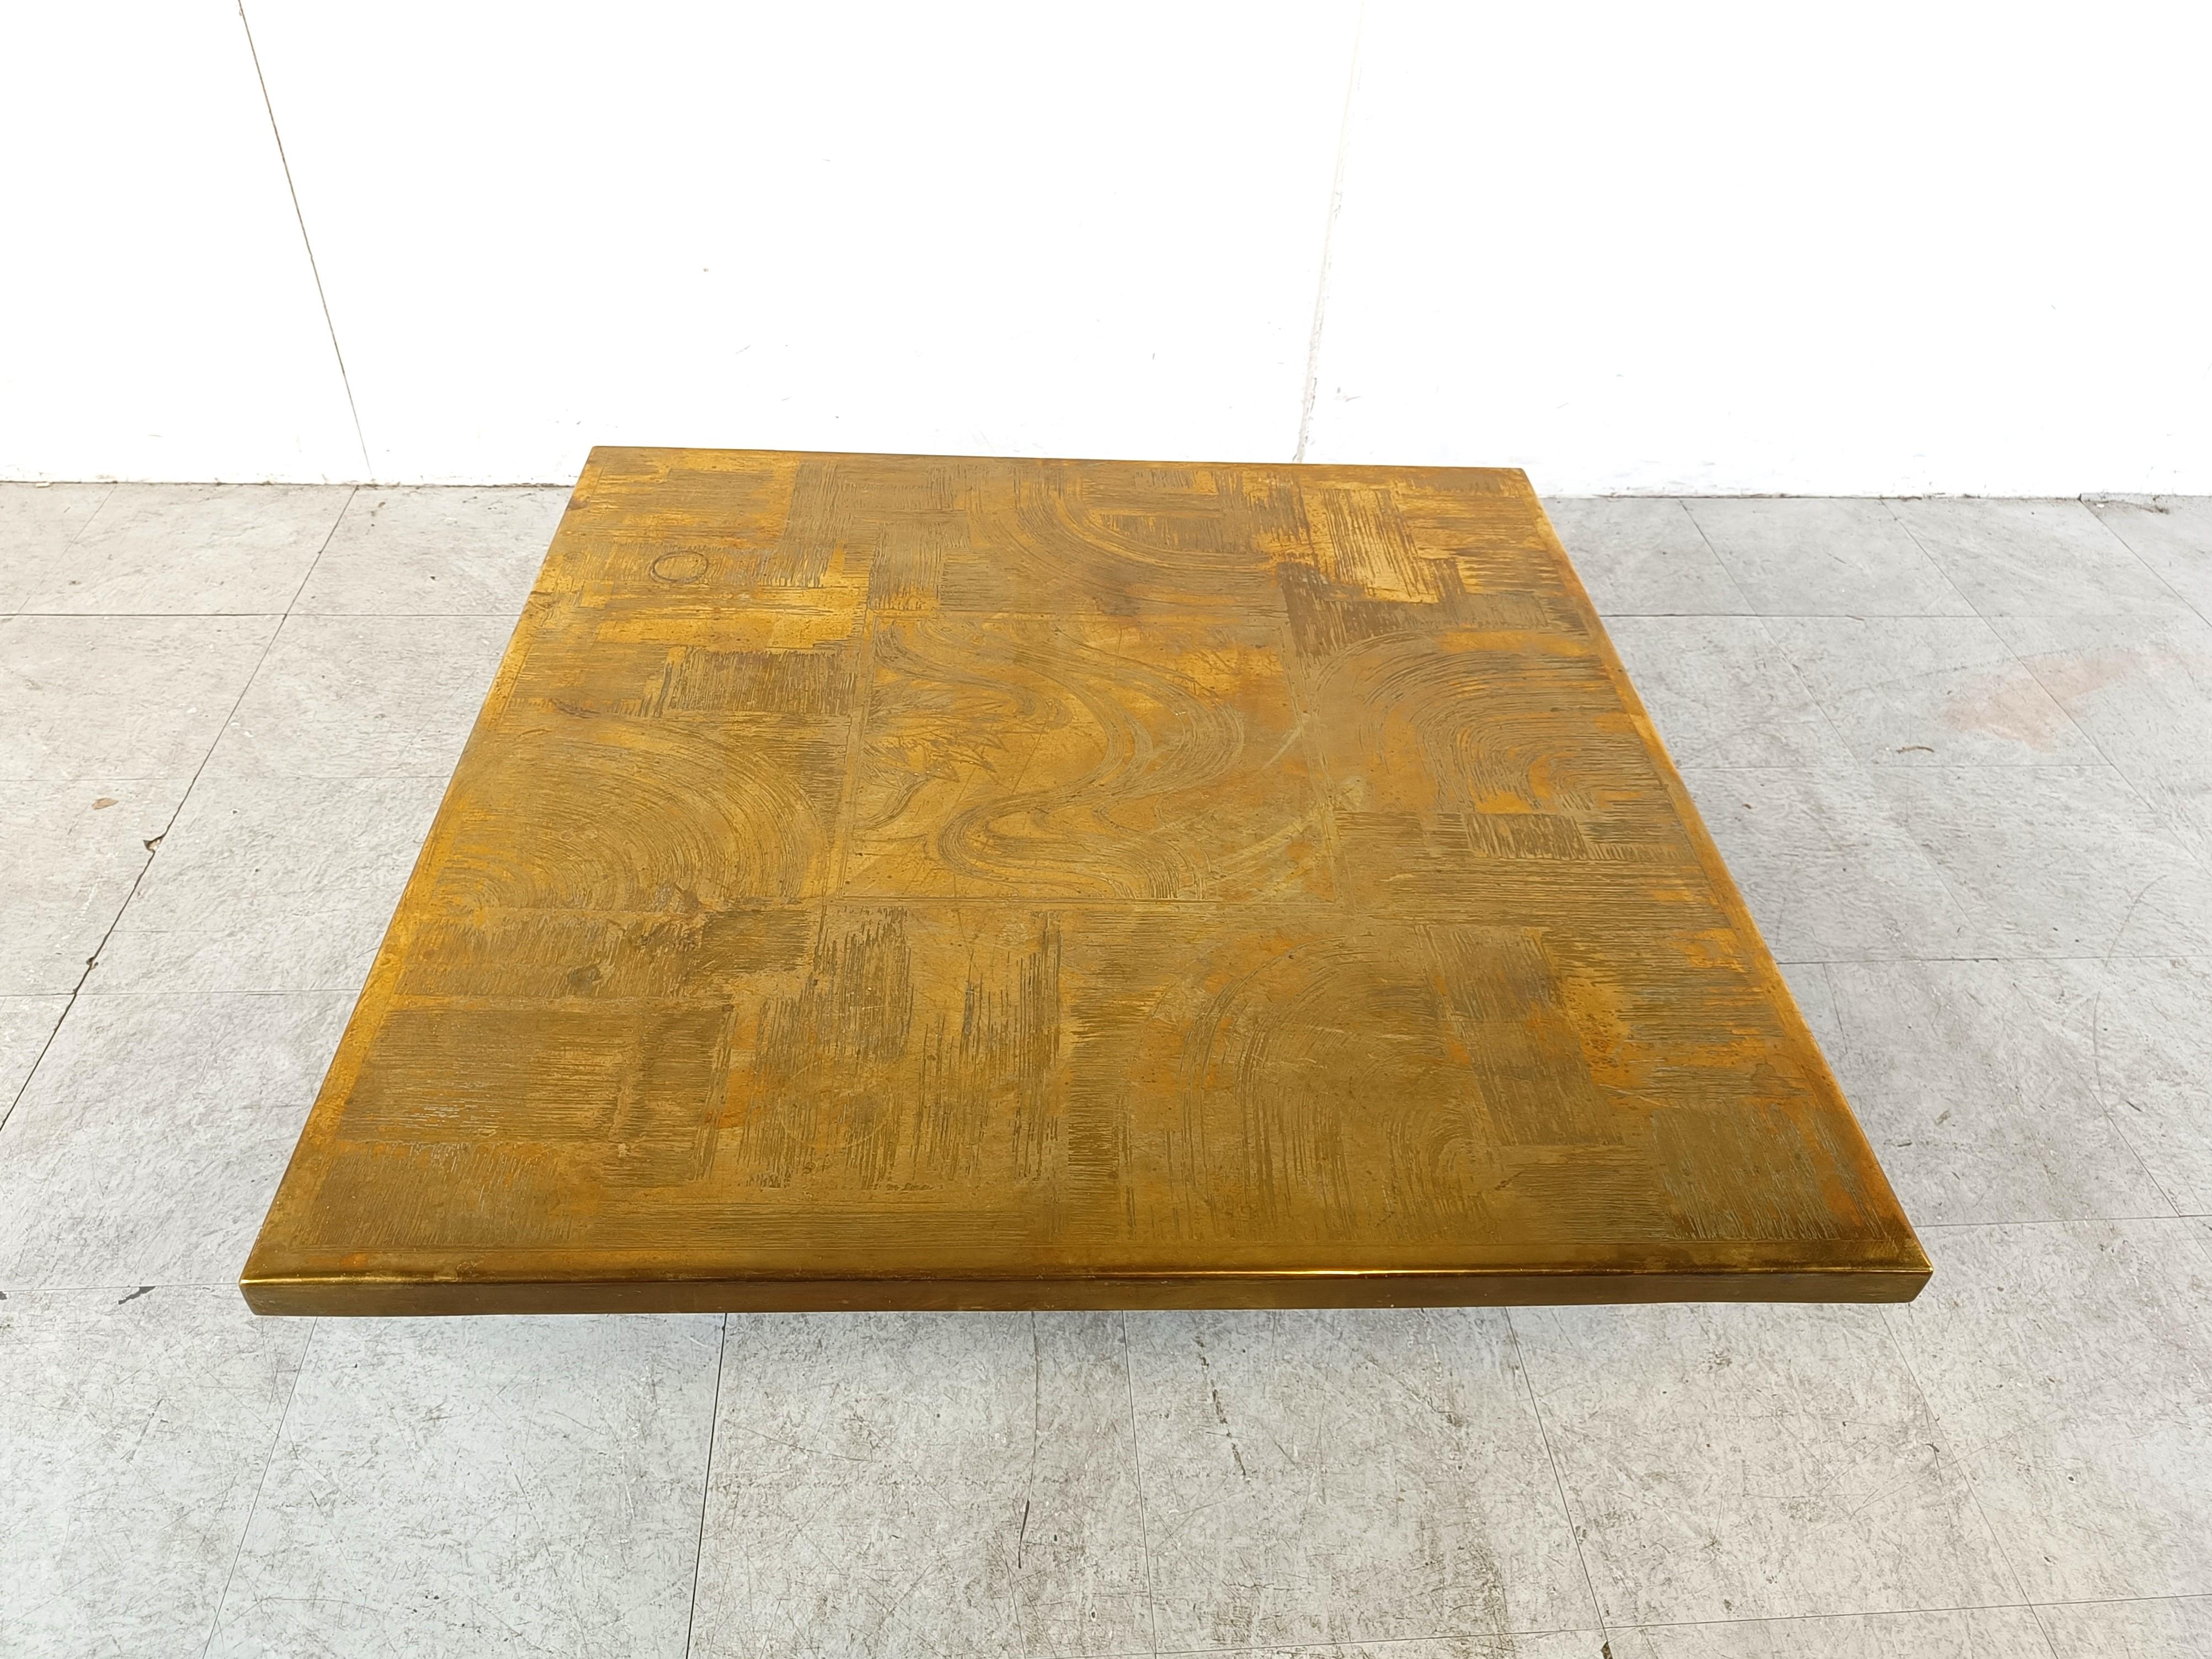 Etched brass coffee table signed by Christian Heckscher,

The coffee table is made of a etched brass top and a black metal base.

The brass is nicely patinated.

1970s - France

Dimensions
Height: 35cm/12.99